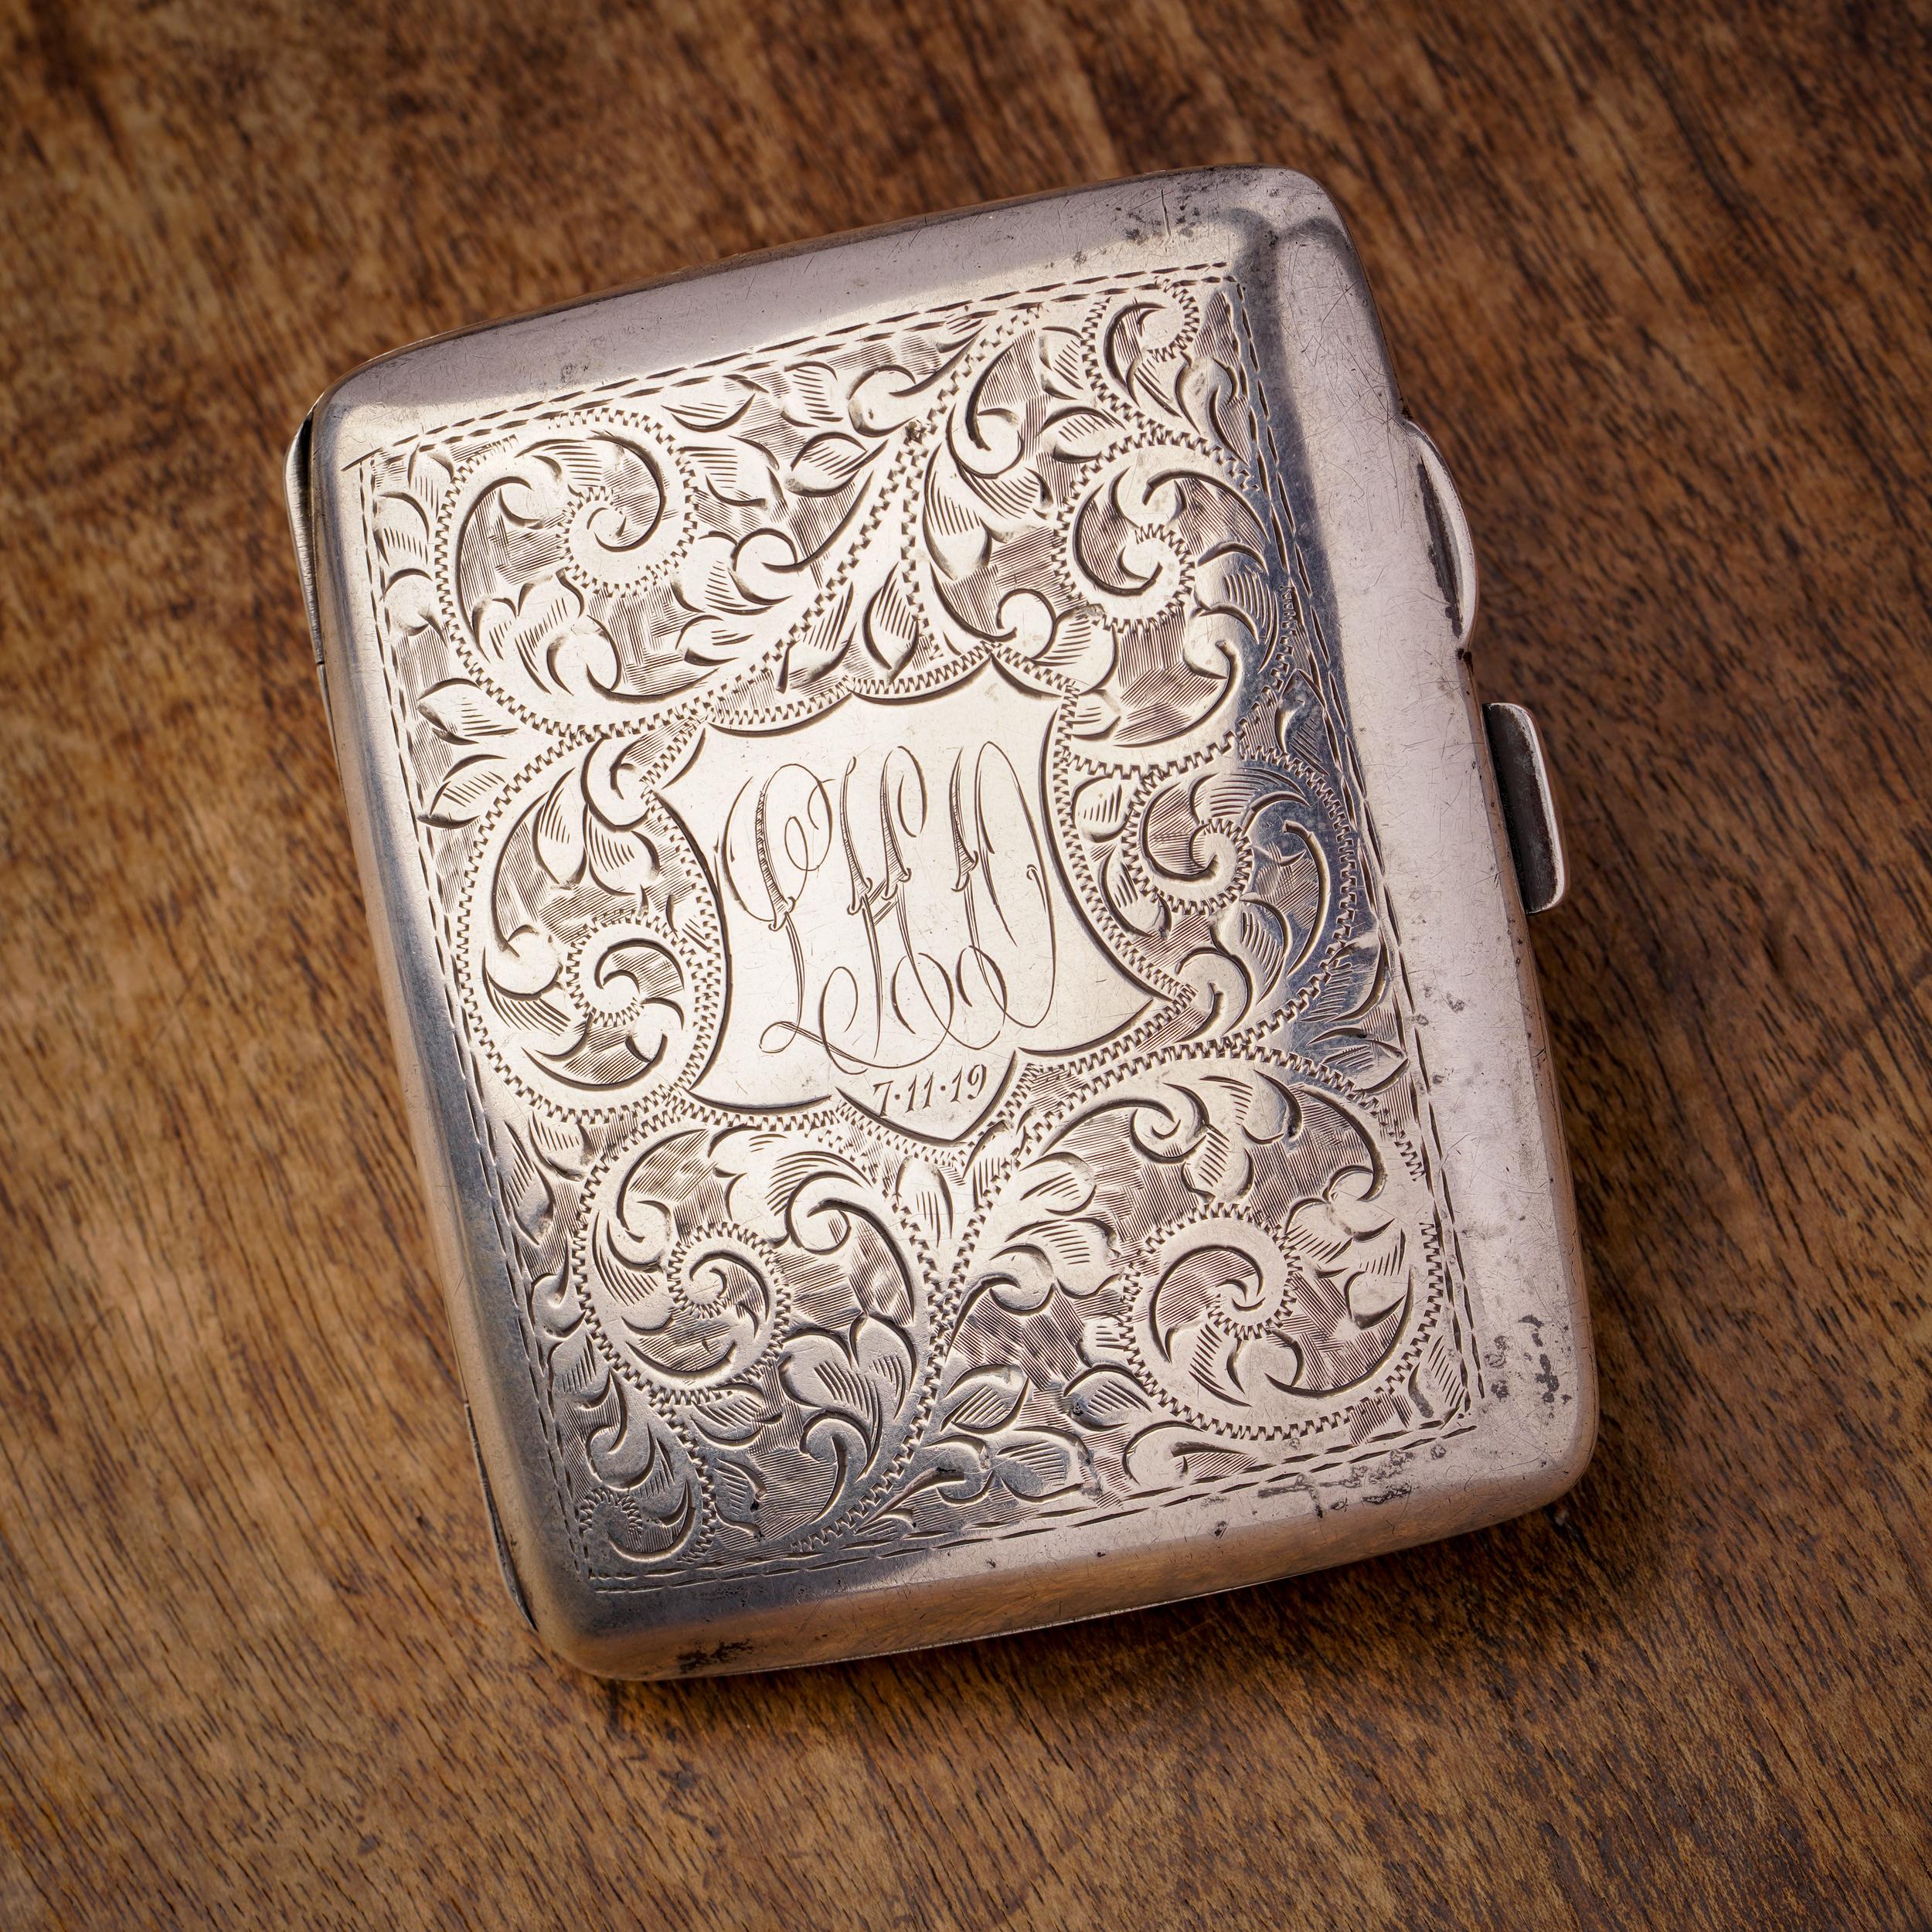 This exquisite cigarette case, crafted from 925 sterling silver, exudes intricate detailing and sophistication. Adorned with the monogram 'LHO' and inscribed with the date '7.11.19', it adds a personalized touch and historical significance to its